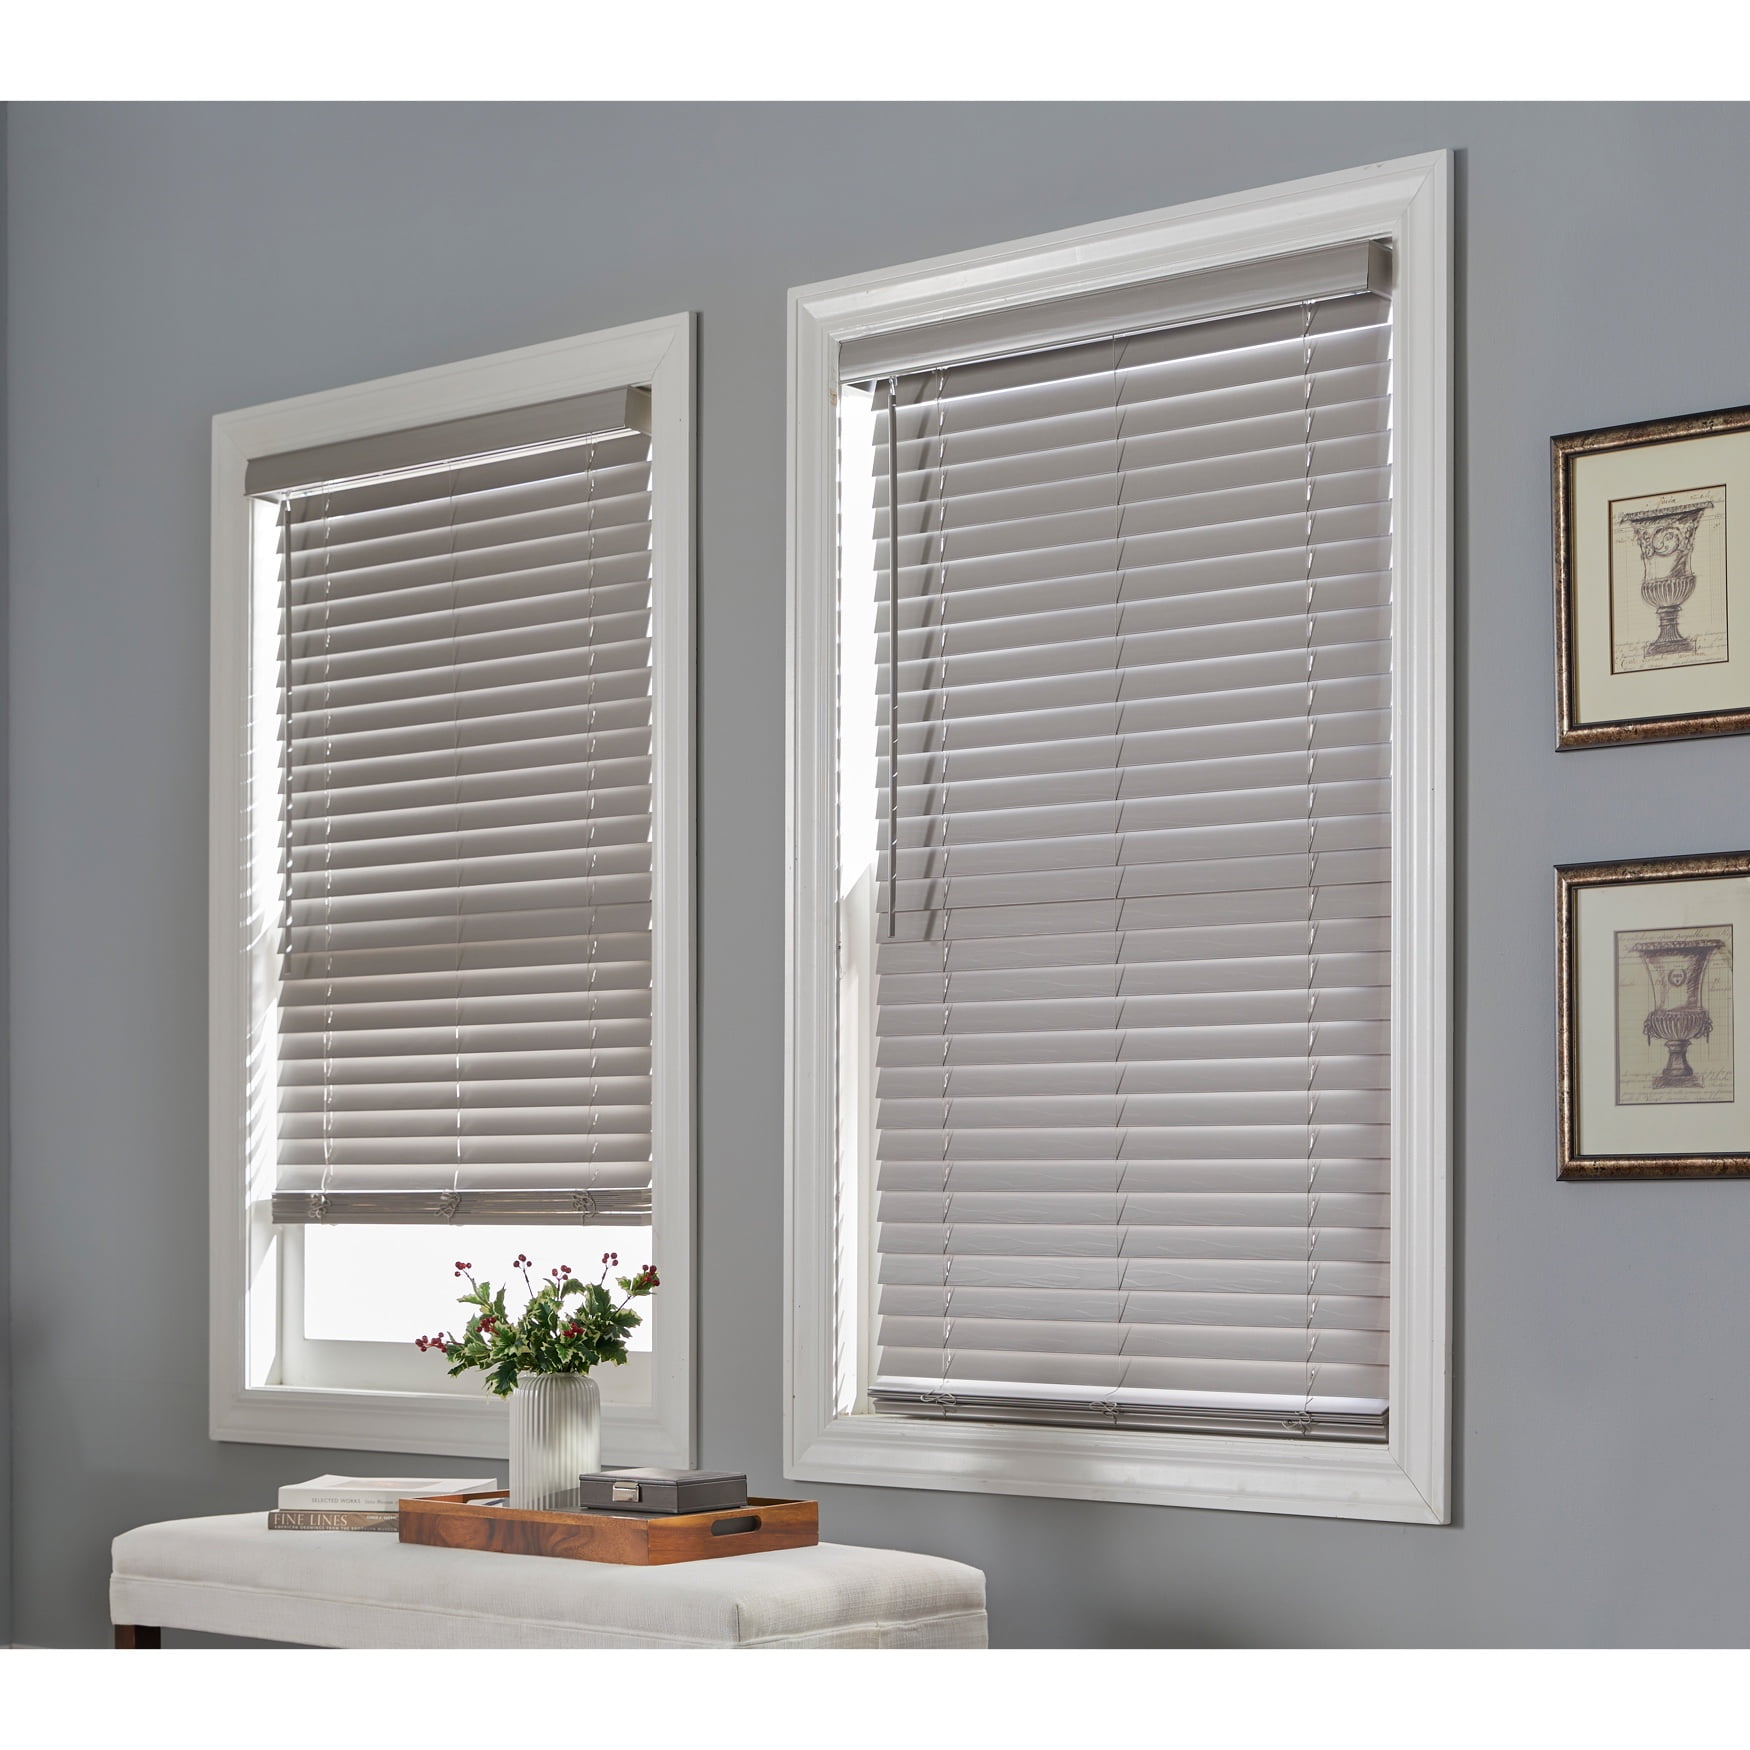 Rustic Blinds 2" Cordless Faux Gray Wood Privacy Window Coverings Room Darkening 